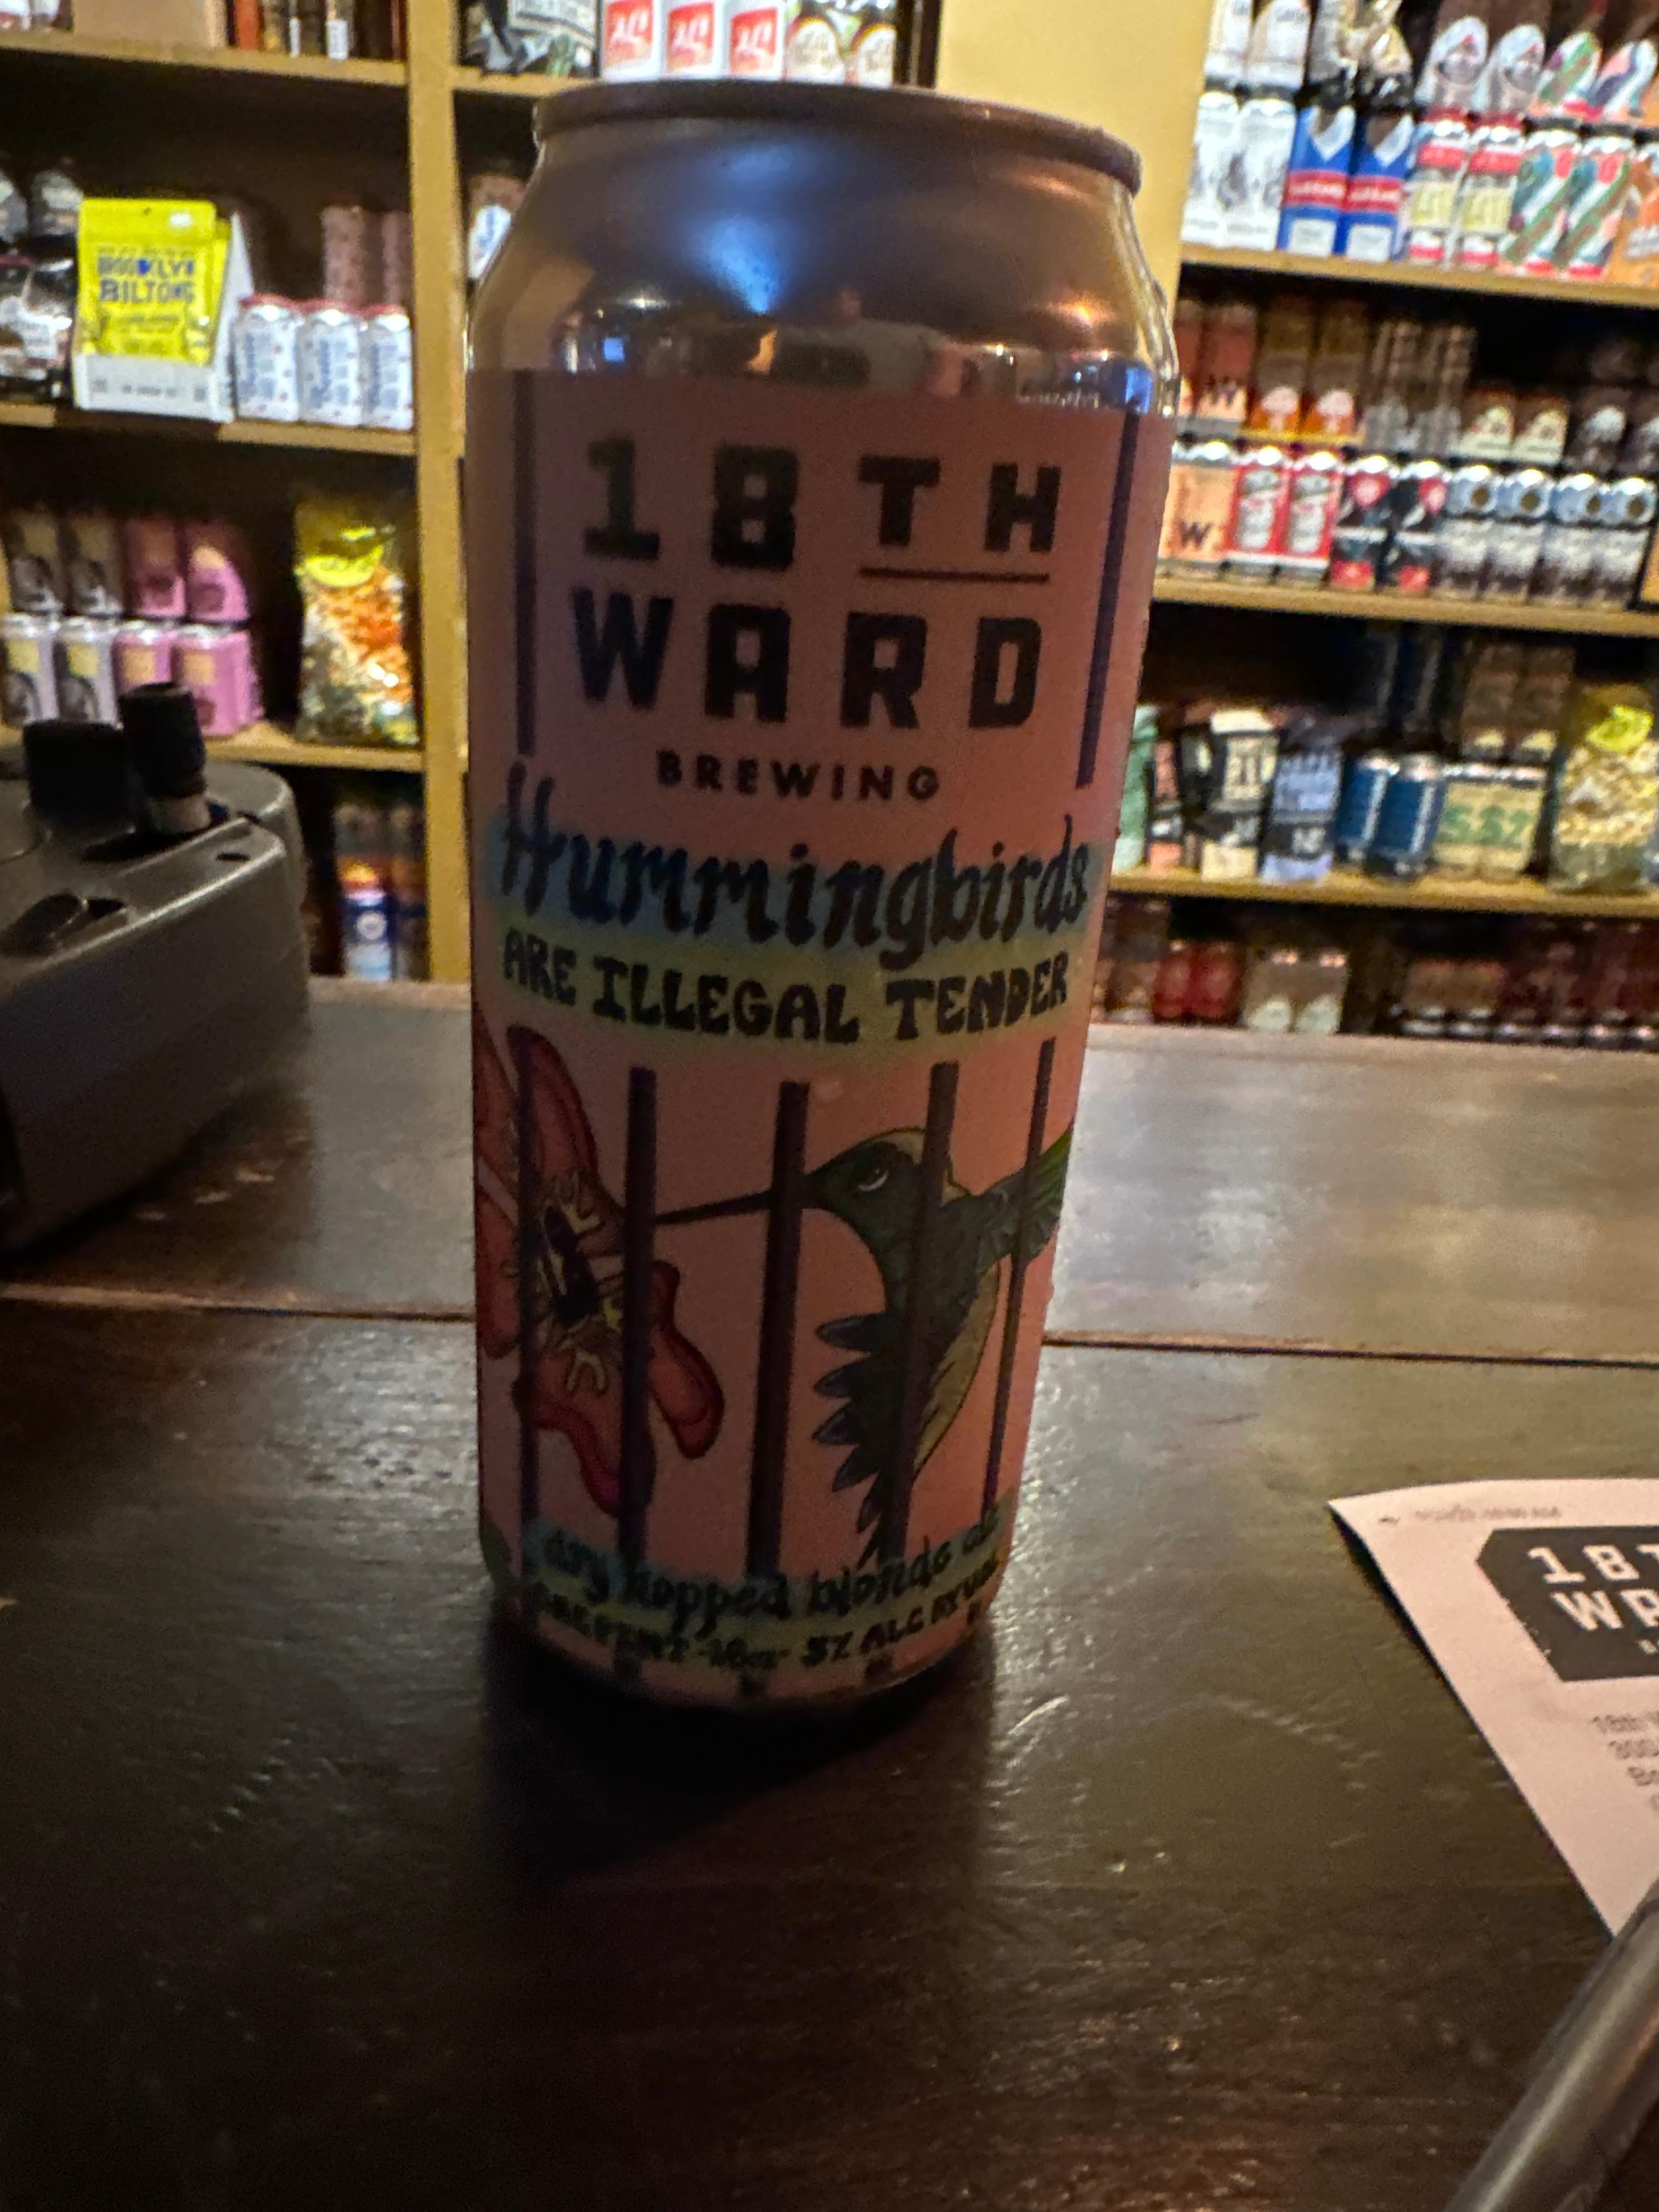 18th Ward Brewing Hummingbirds Are Illegal Tender Blonde Ale 16oz